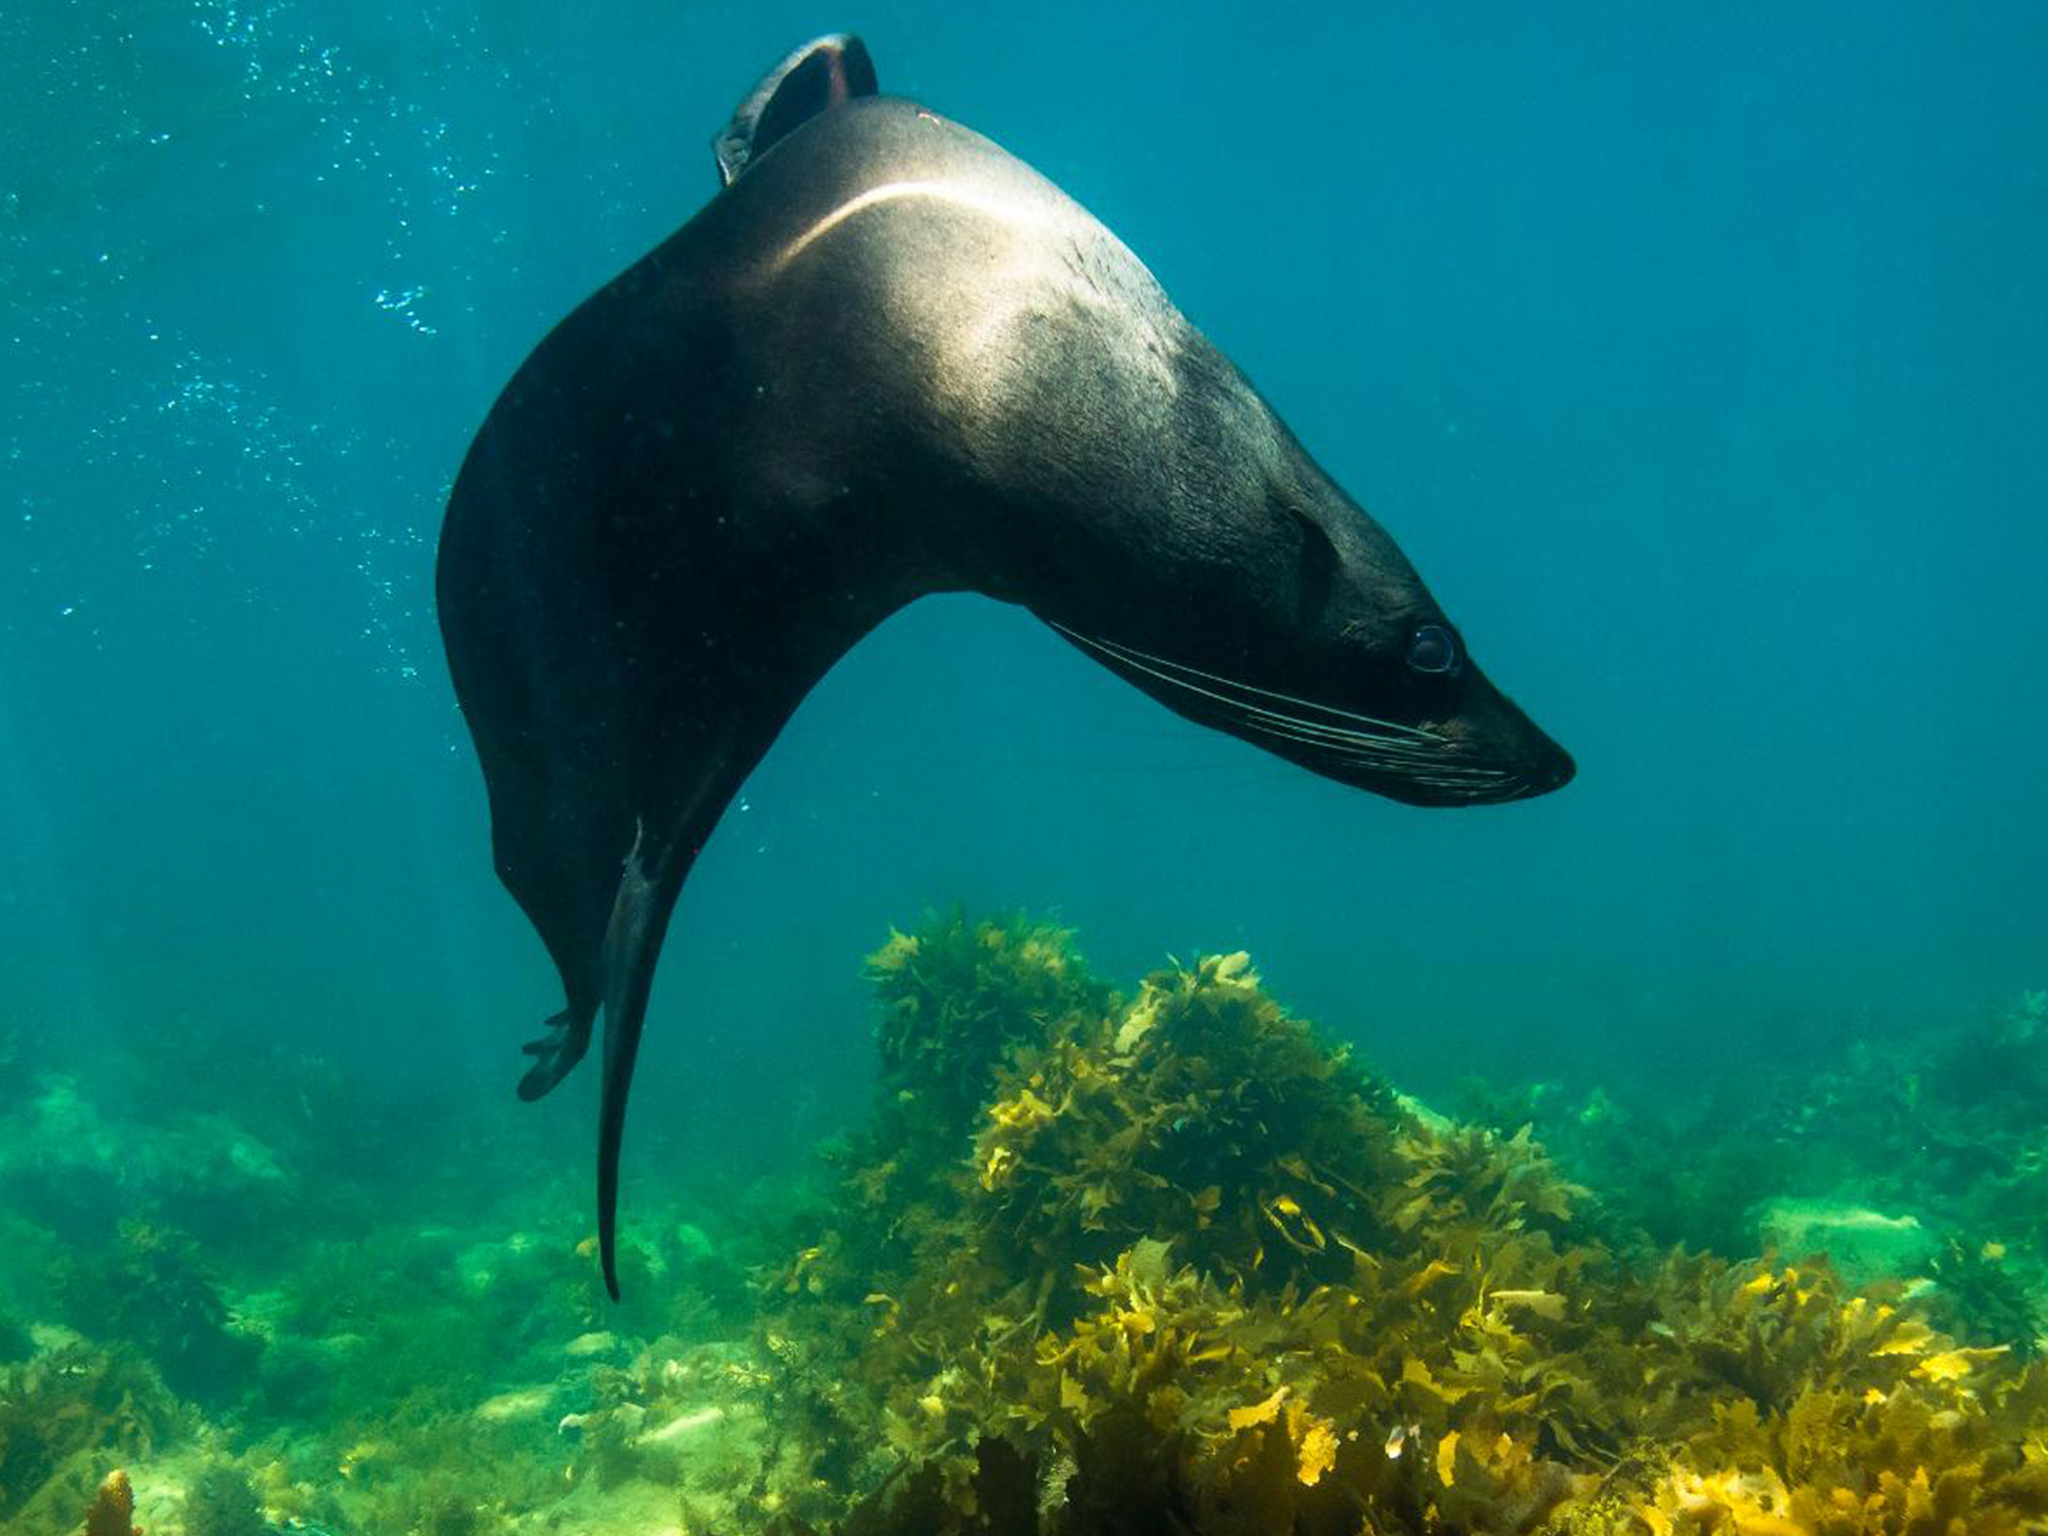 Private Snorkelling Charter - Swim with Seals/Dolphins/Coastal Snorkel